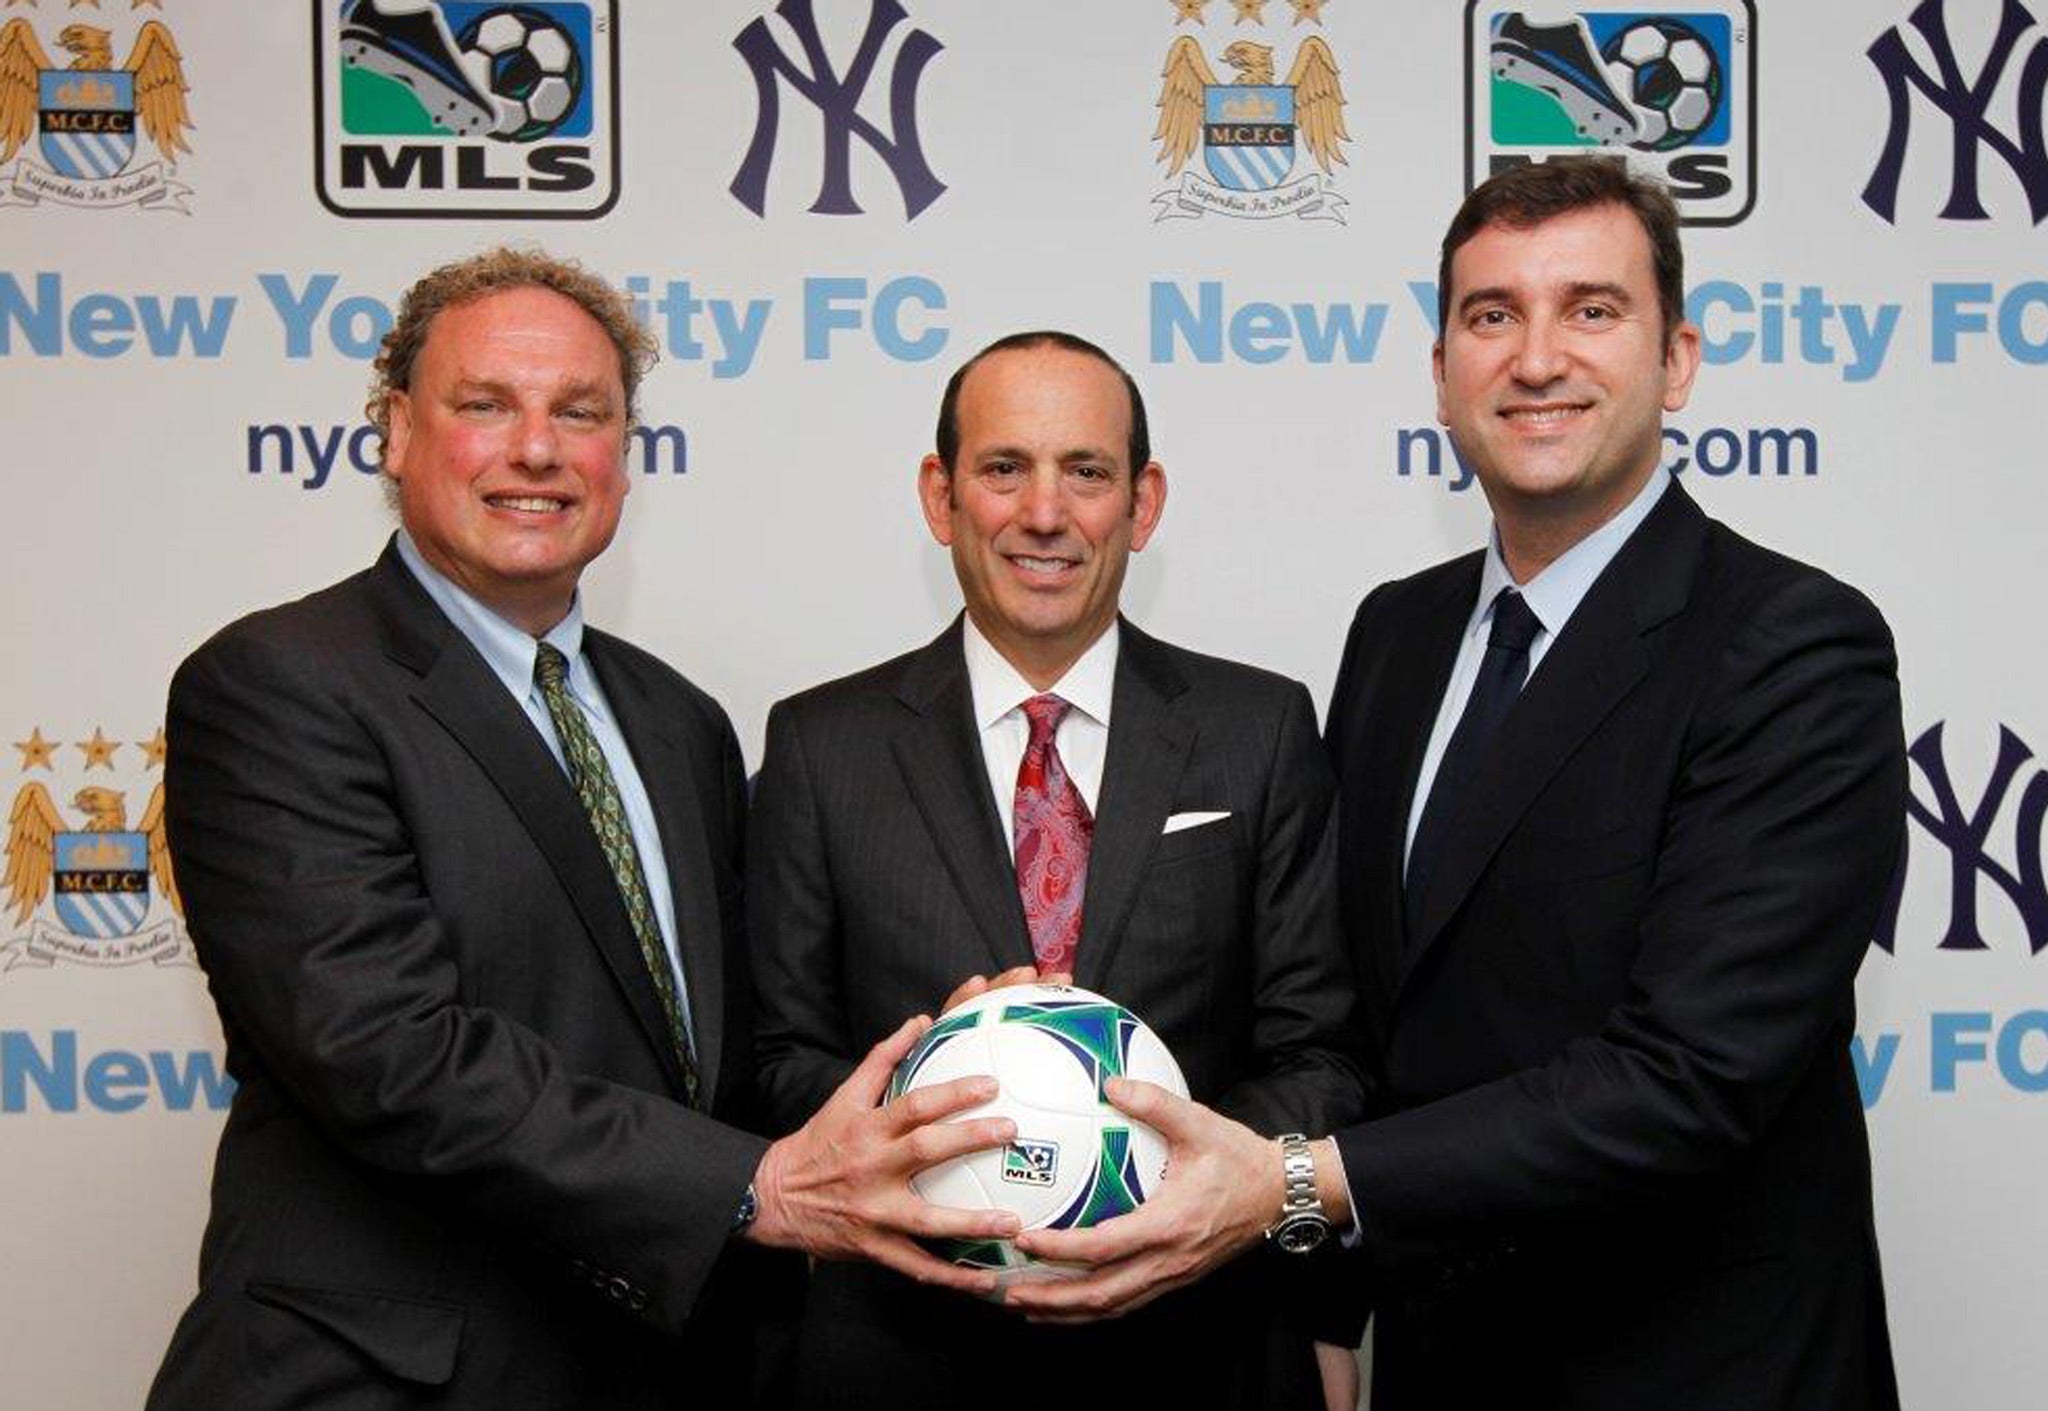 New York Yankees president Randy Levine, MLS commissioner Don Garber and Manchester City chief executive Ferran Soriano